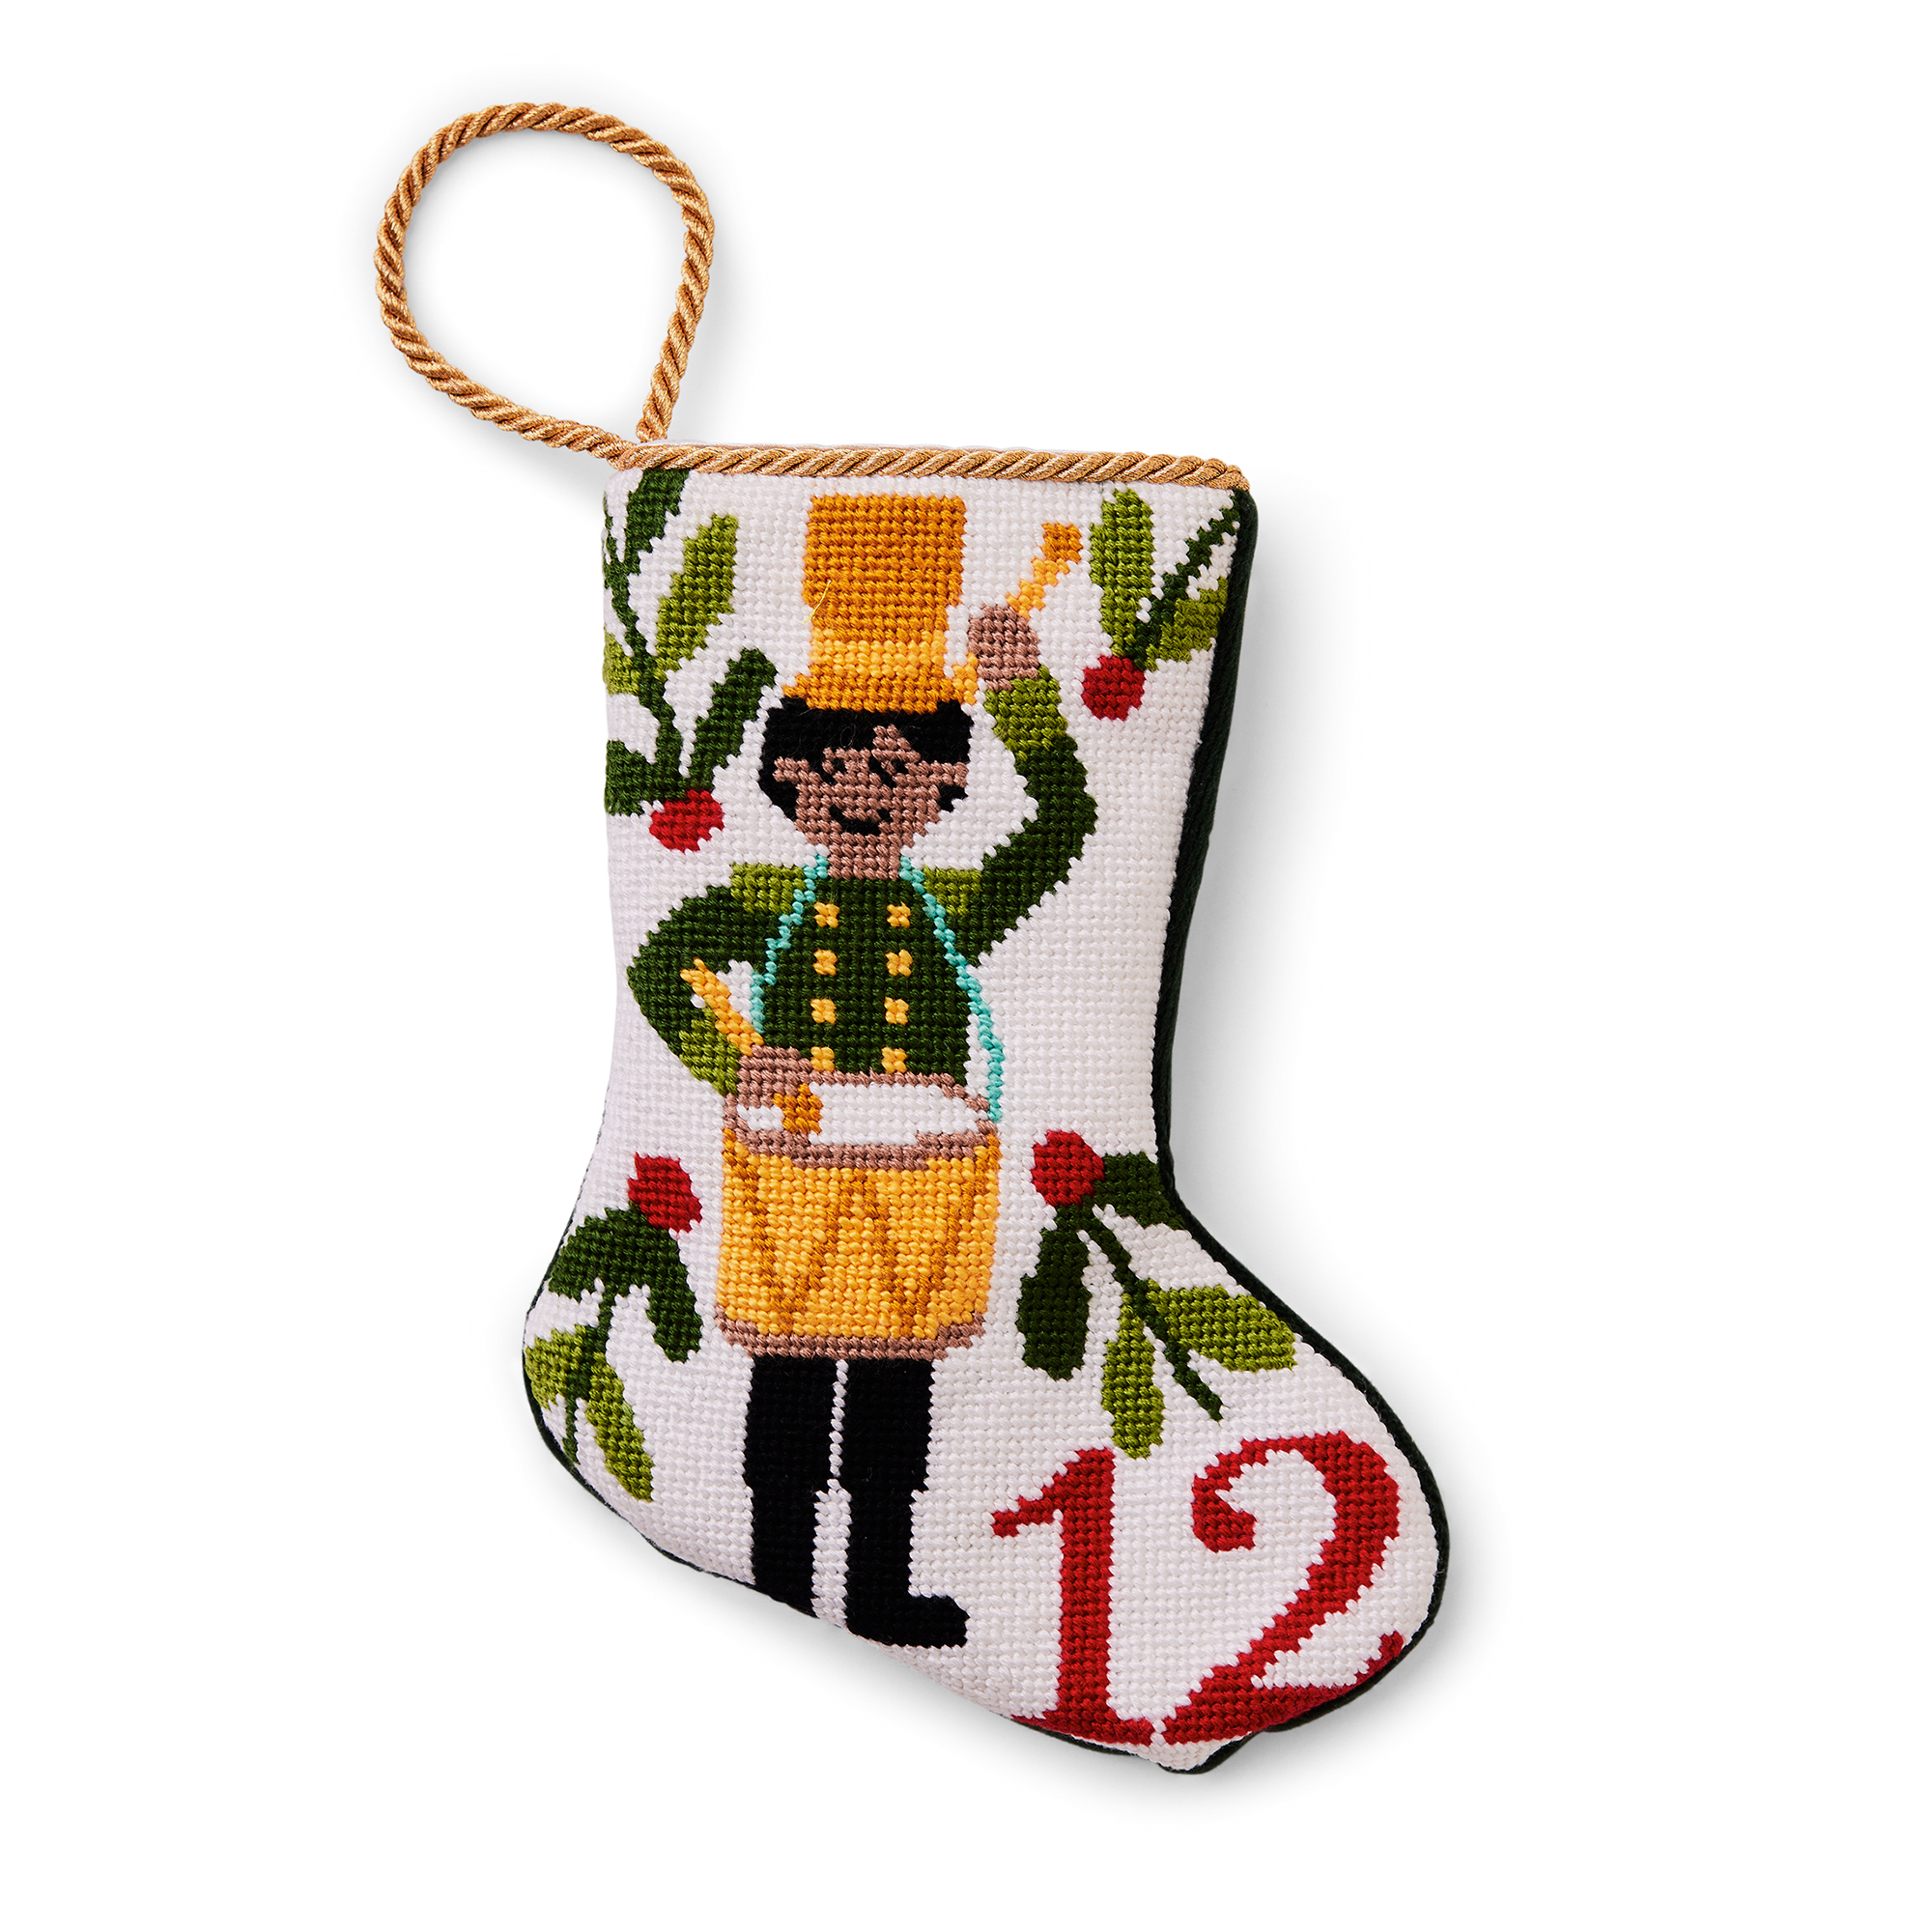 An intricately designed mini needlepoint stocking featuring the '12 Drummers Drumming' from the classic Christmas carol. This festive decoration adds a traditional and charming touch to your holiday decor. Perfect as tree ornaments, place settings, or for holding special gifts.